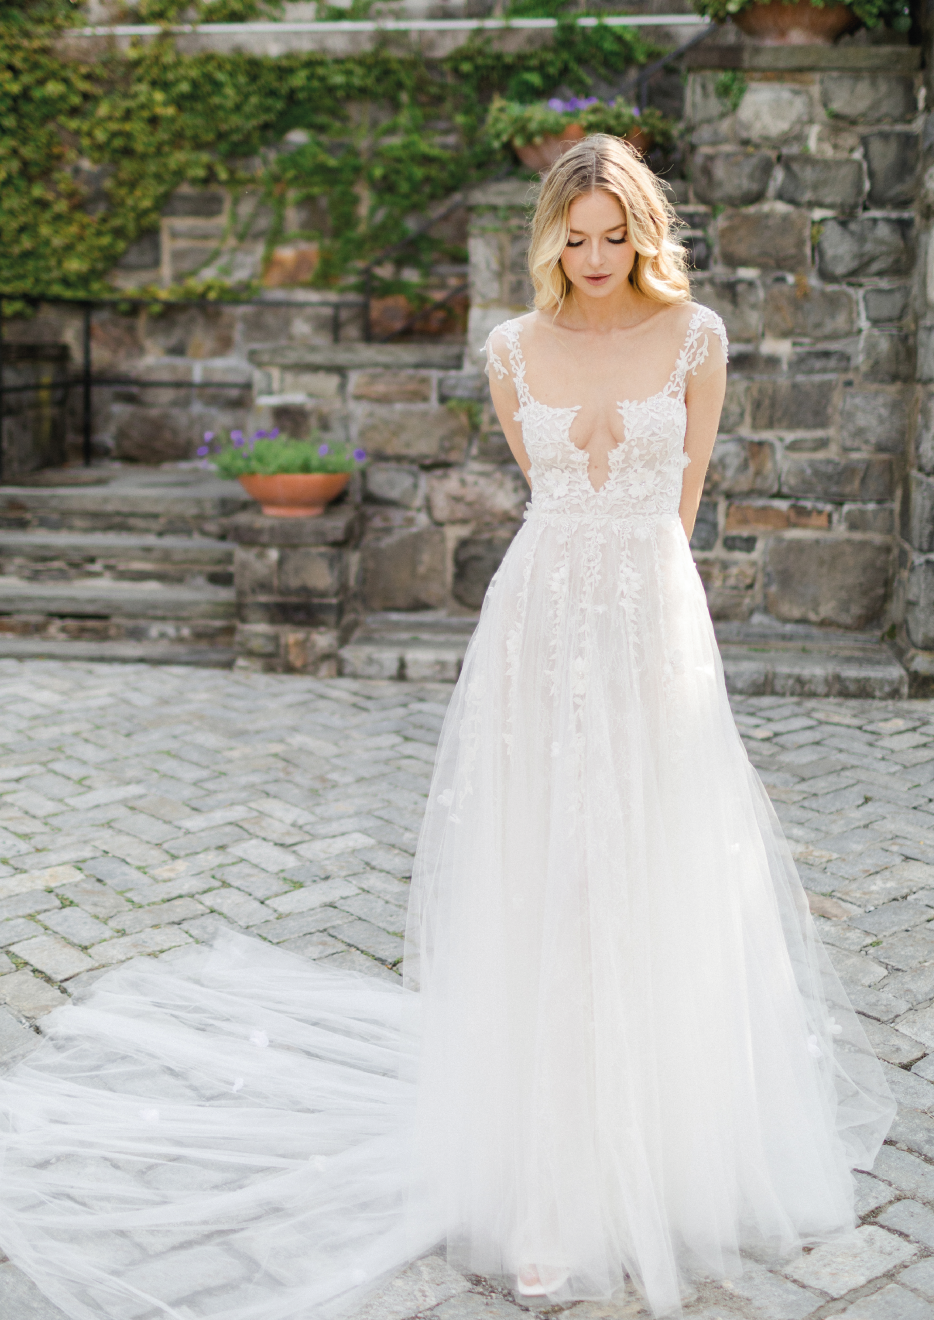 Bride Dress Model Elizabeth - Dress with Cap sleeve, low scooped neckline, gown with low illusion - Verdin New York